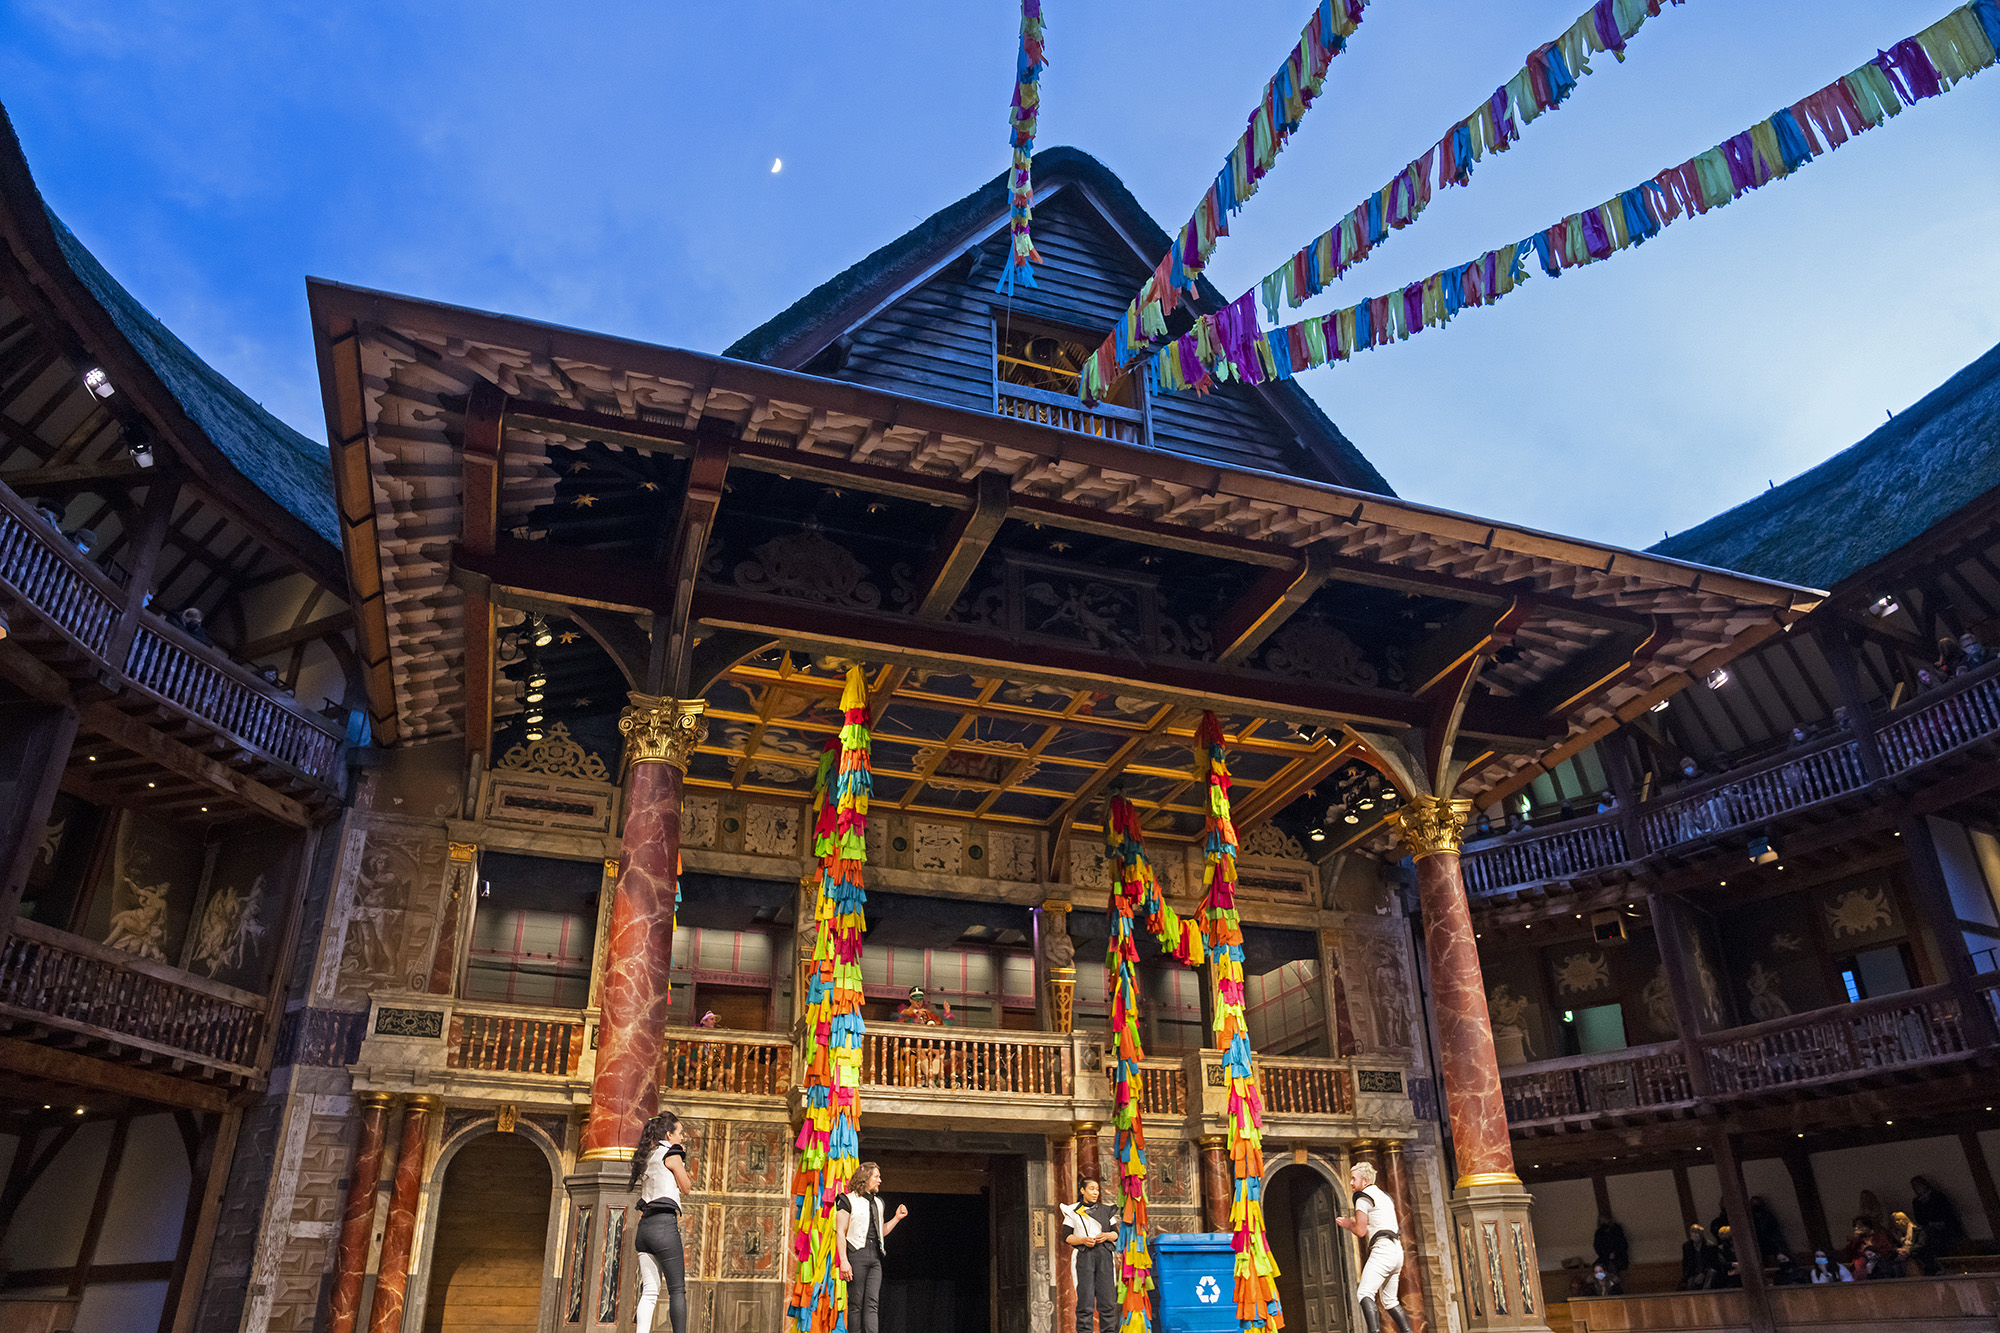 A twilight night sky, with a glimpse of the moon, shines above the Globe Theatre stage: with colourful streamings hanging across the open-air roof.